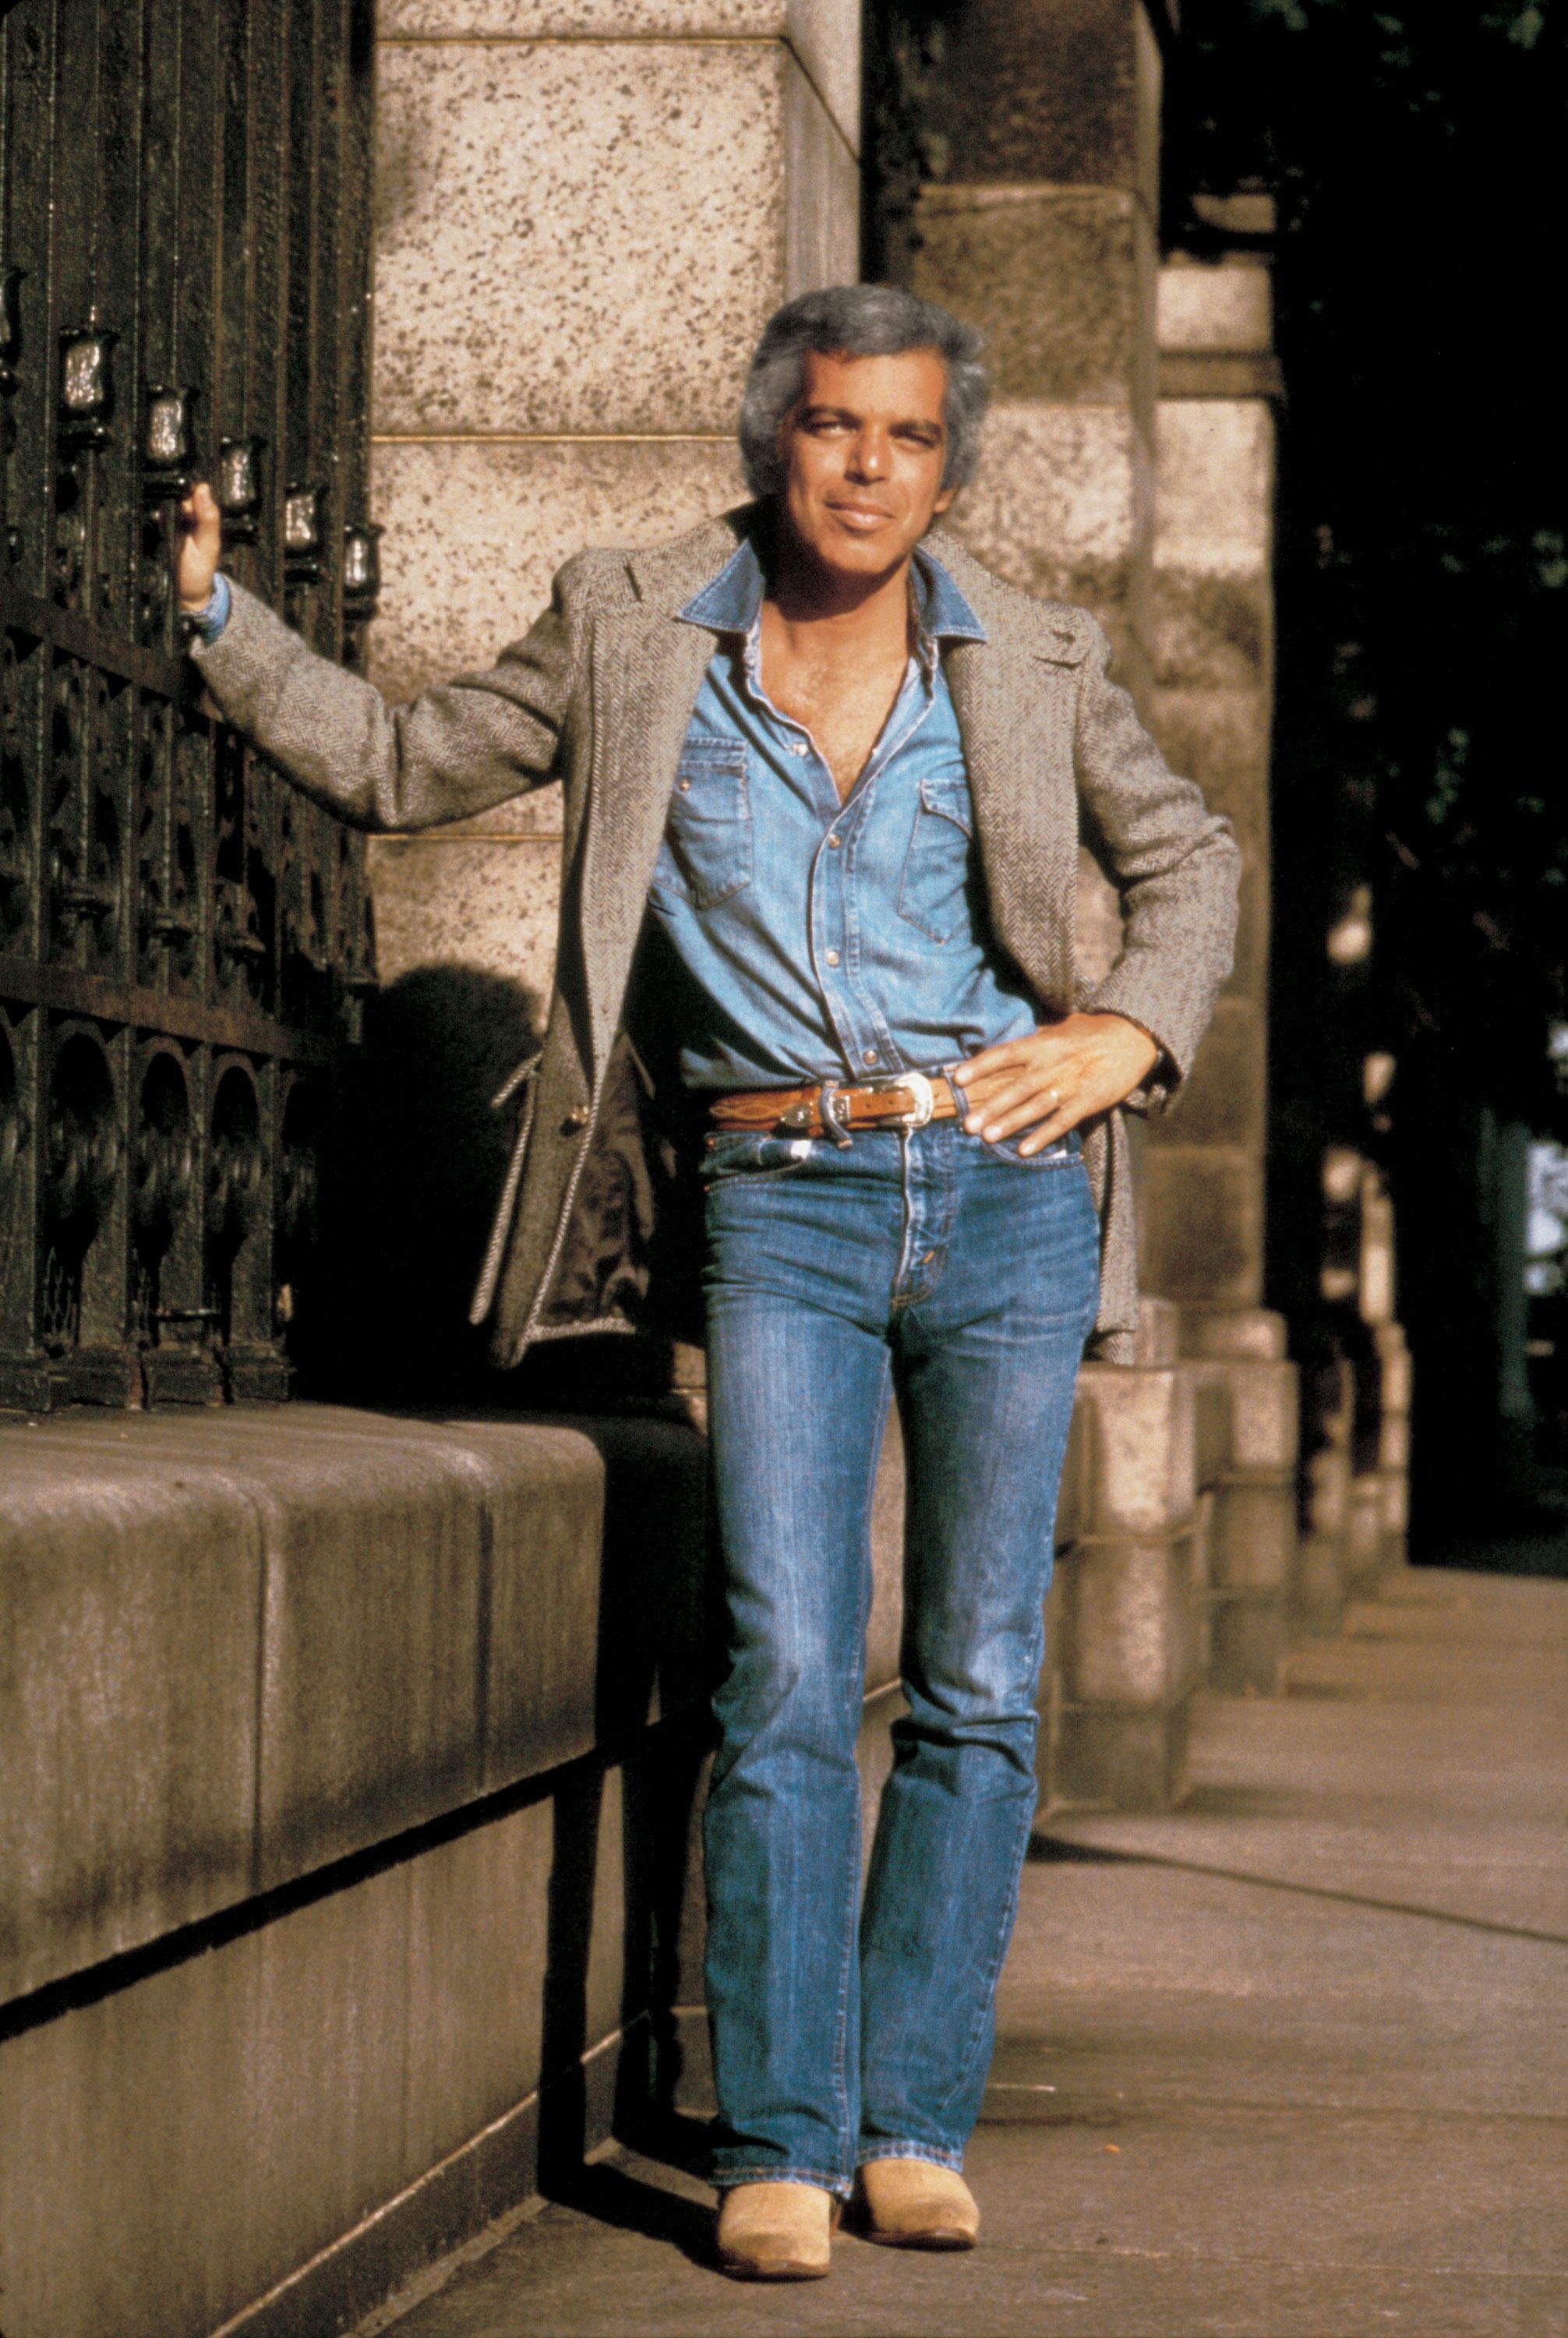 Ralph Lauren: The Father Of Fashion